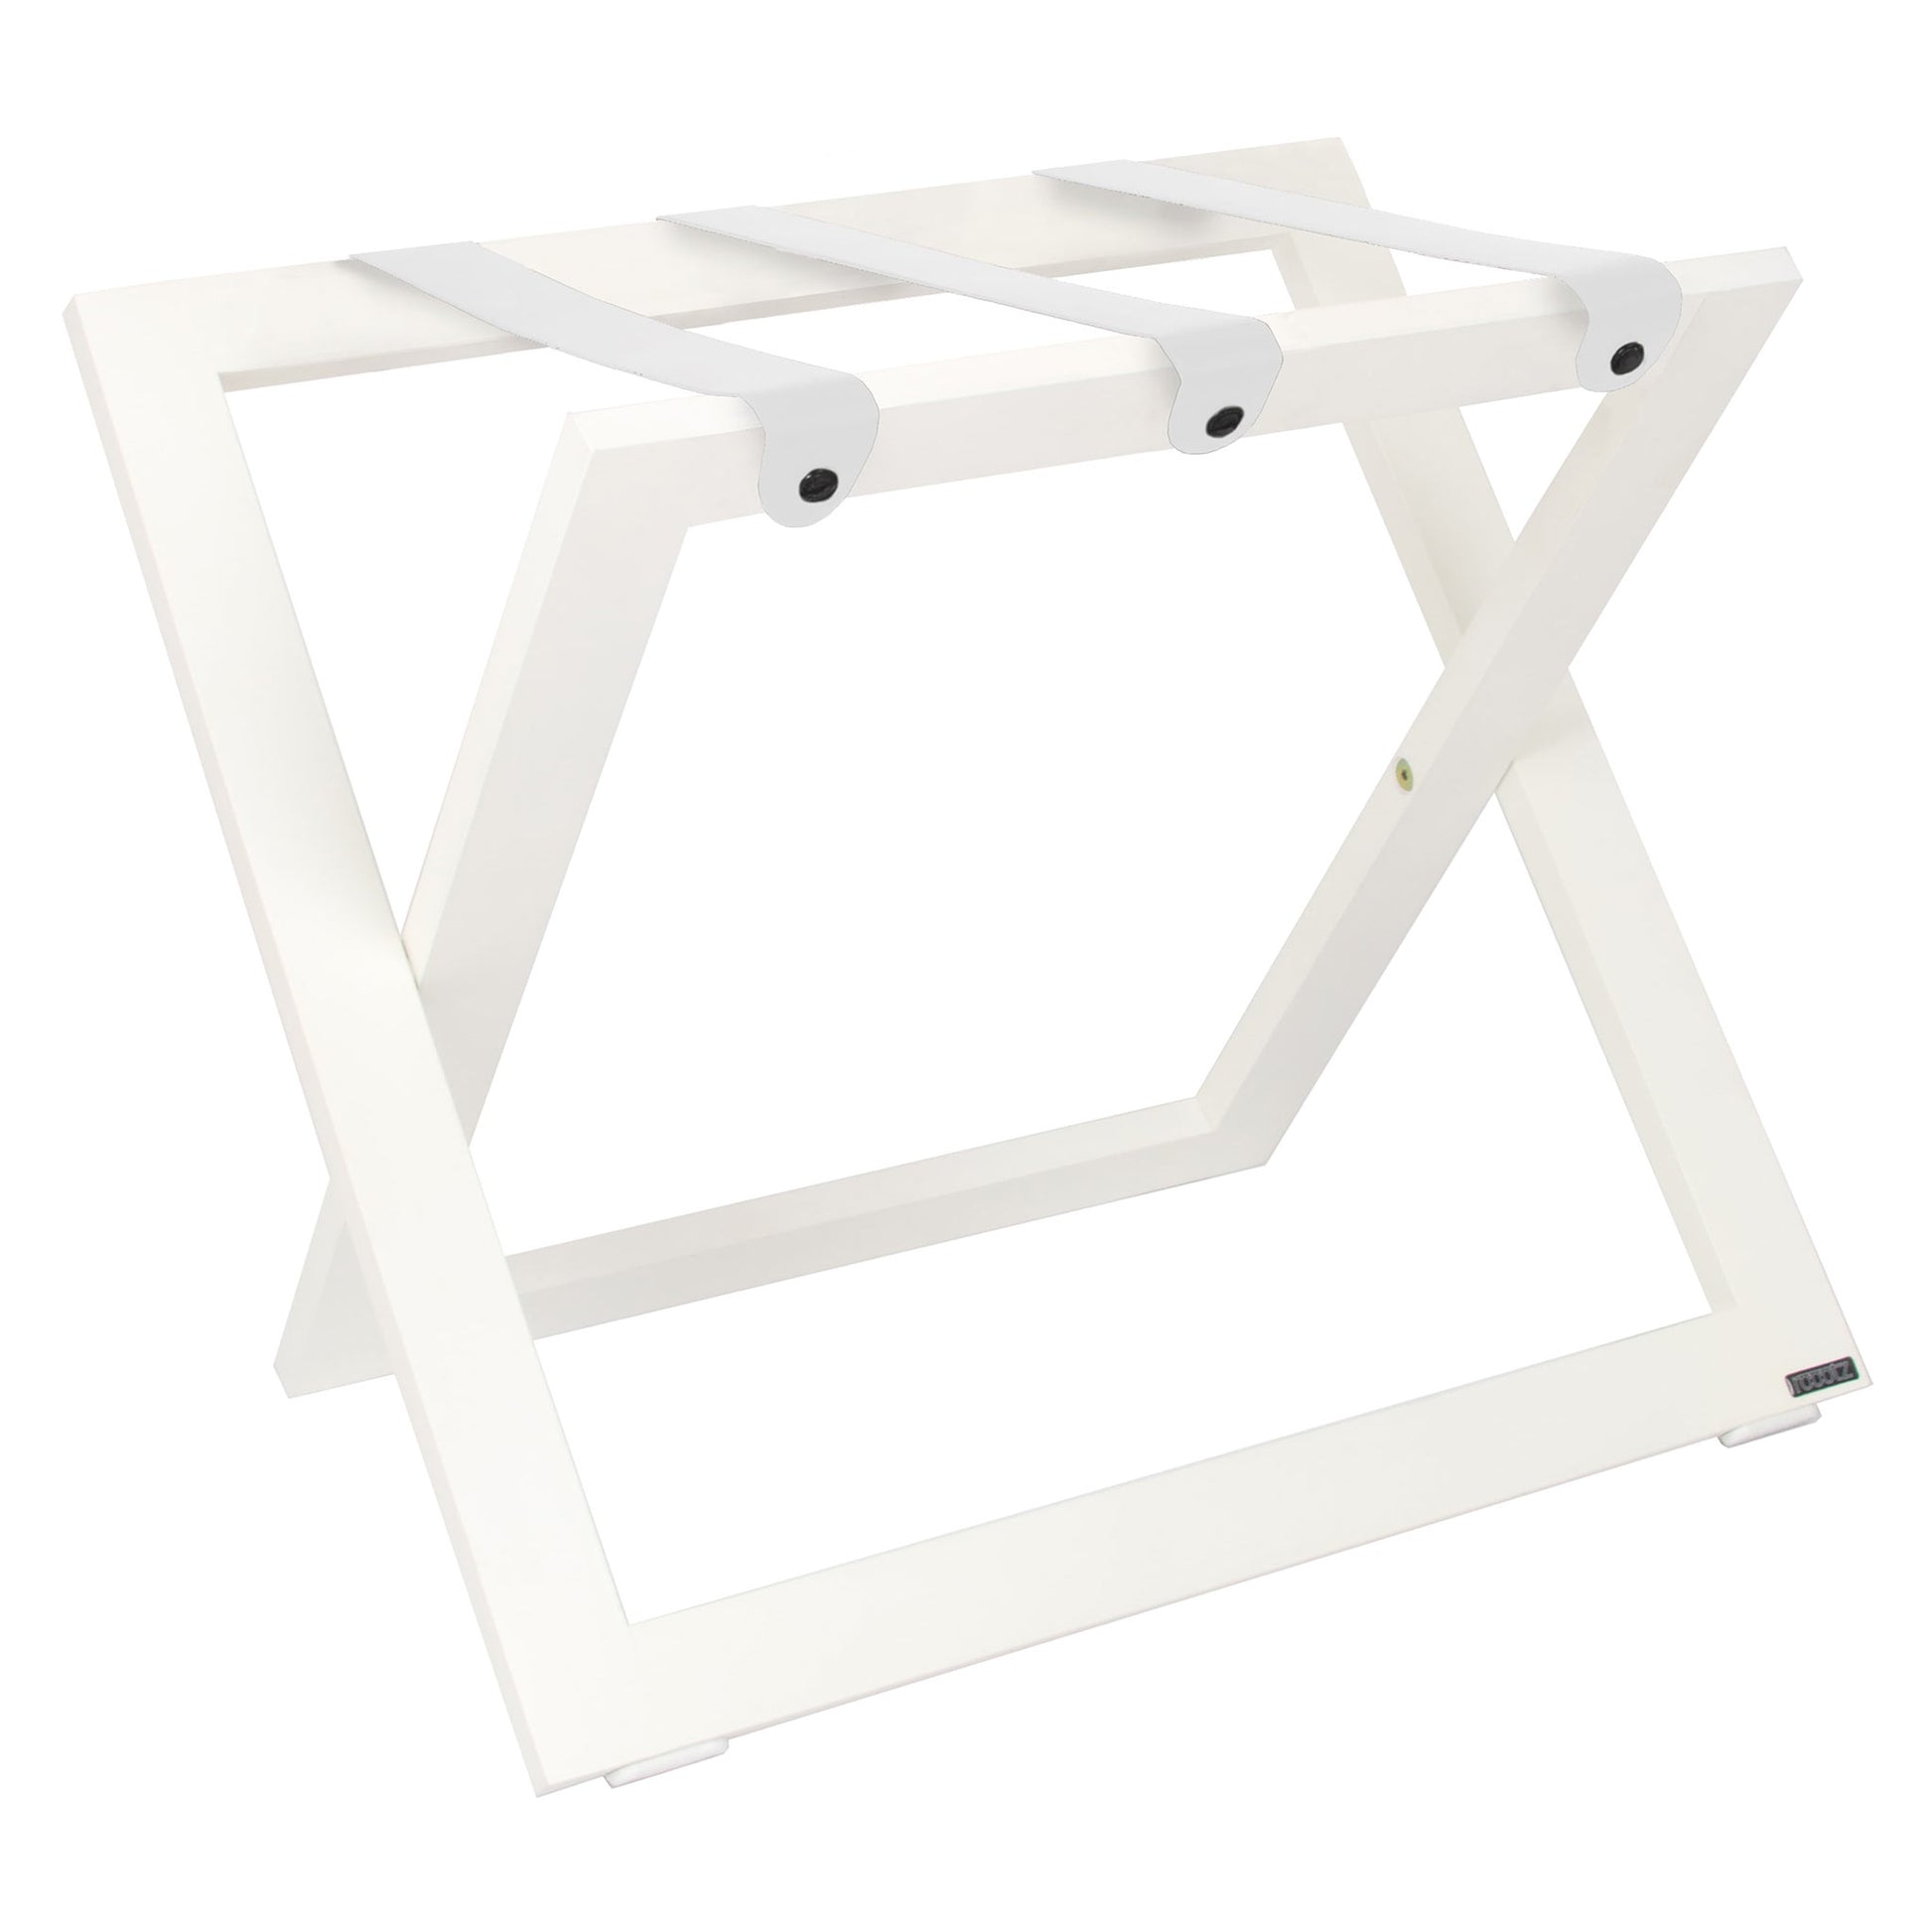 Roootz compact white wooden hotel luggage rack with white leather straps